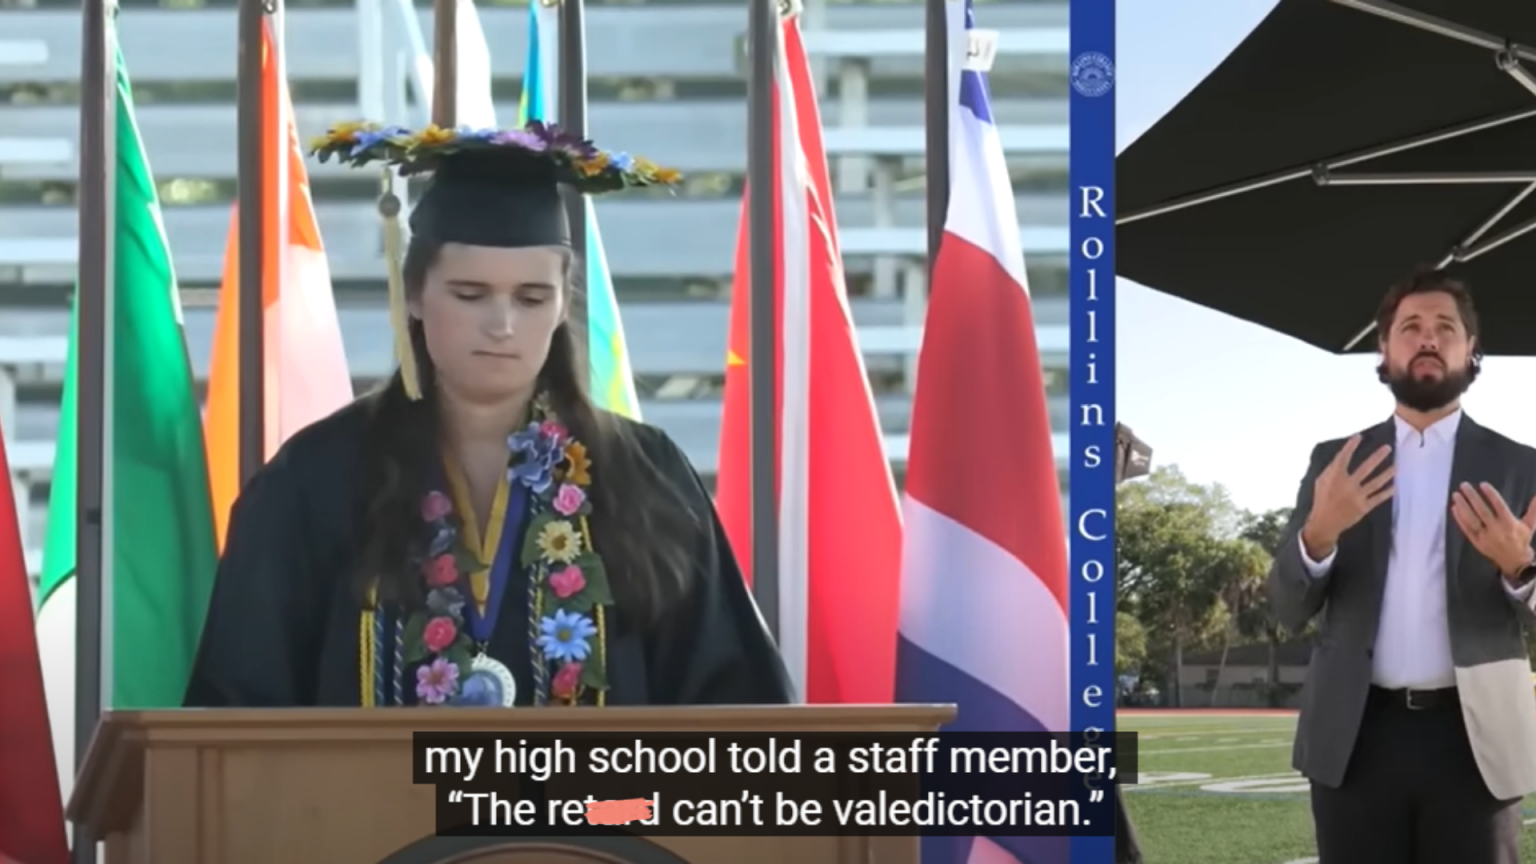 Non speaking Autistic Valedictorian shares the struggles of not being heard or accepted